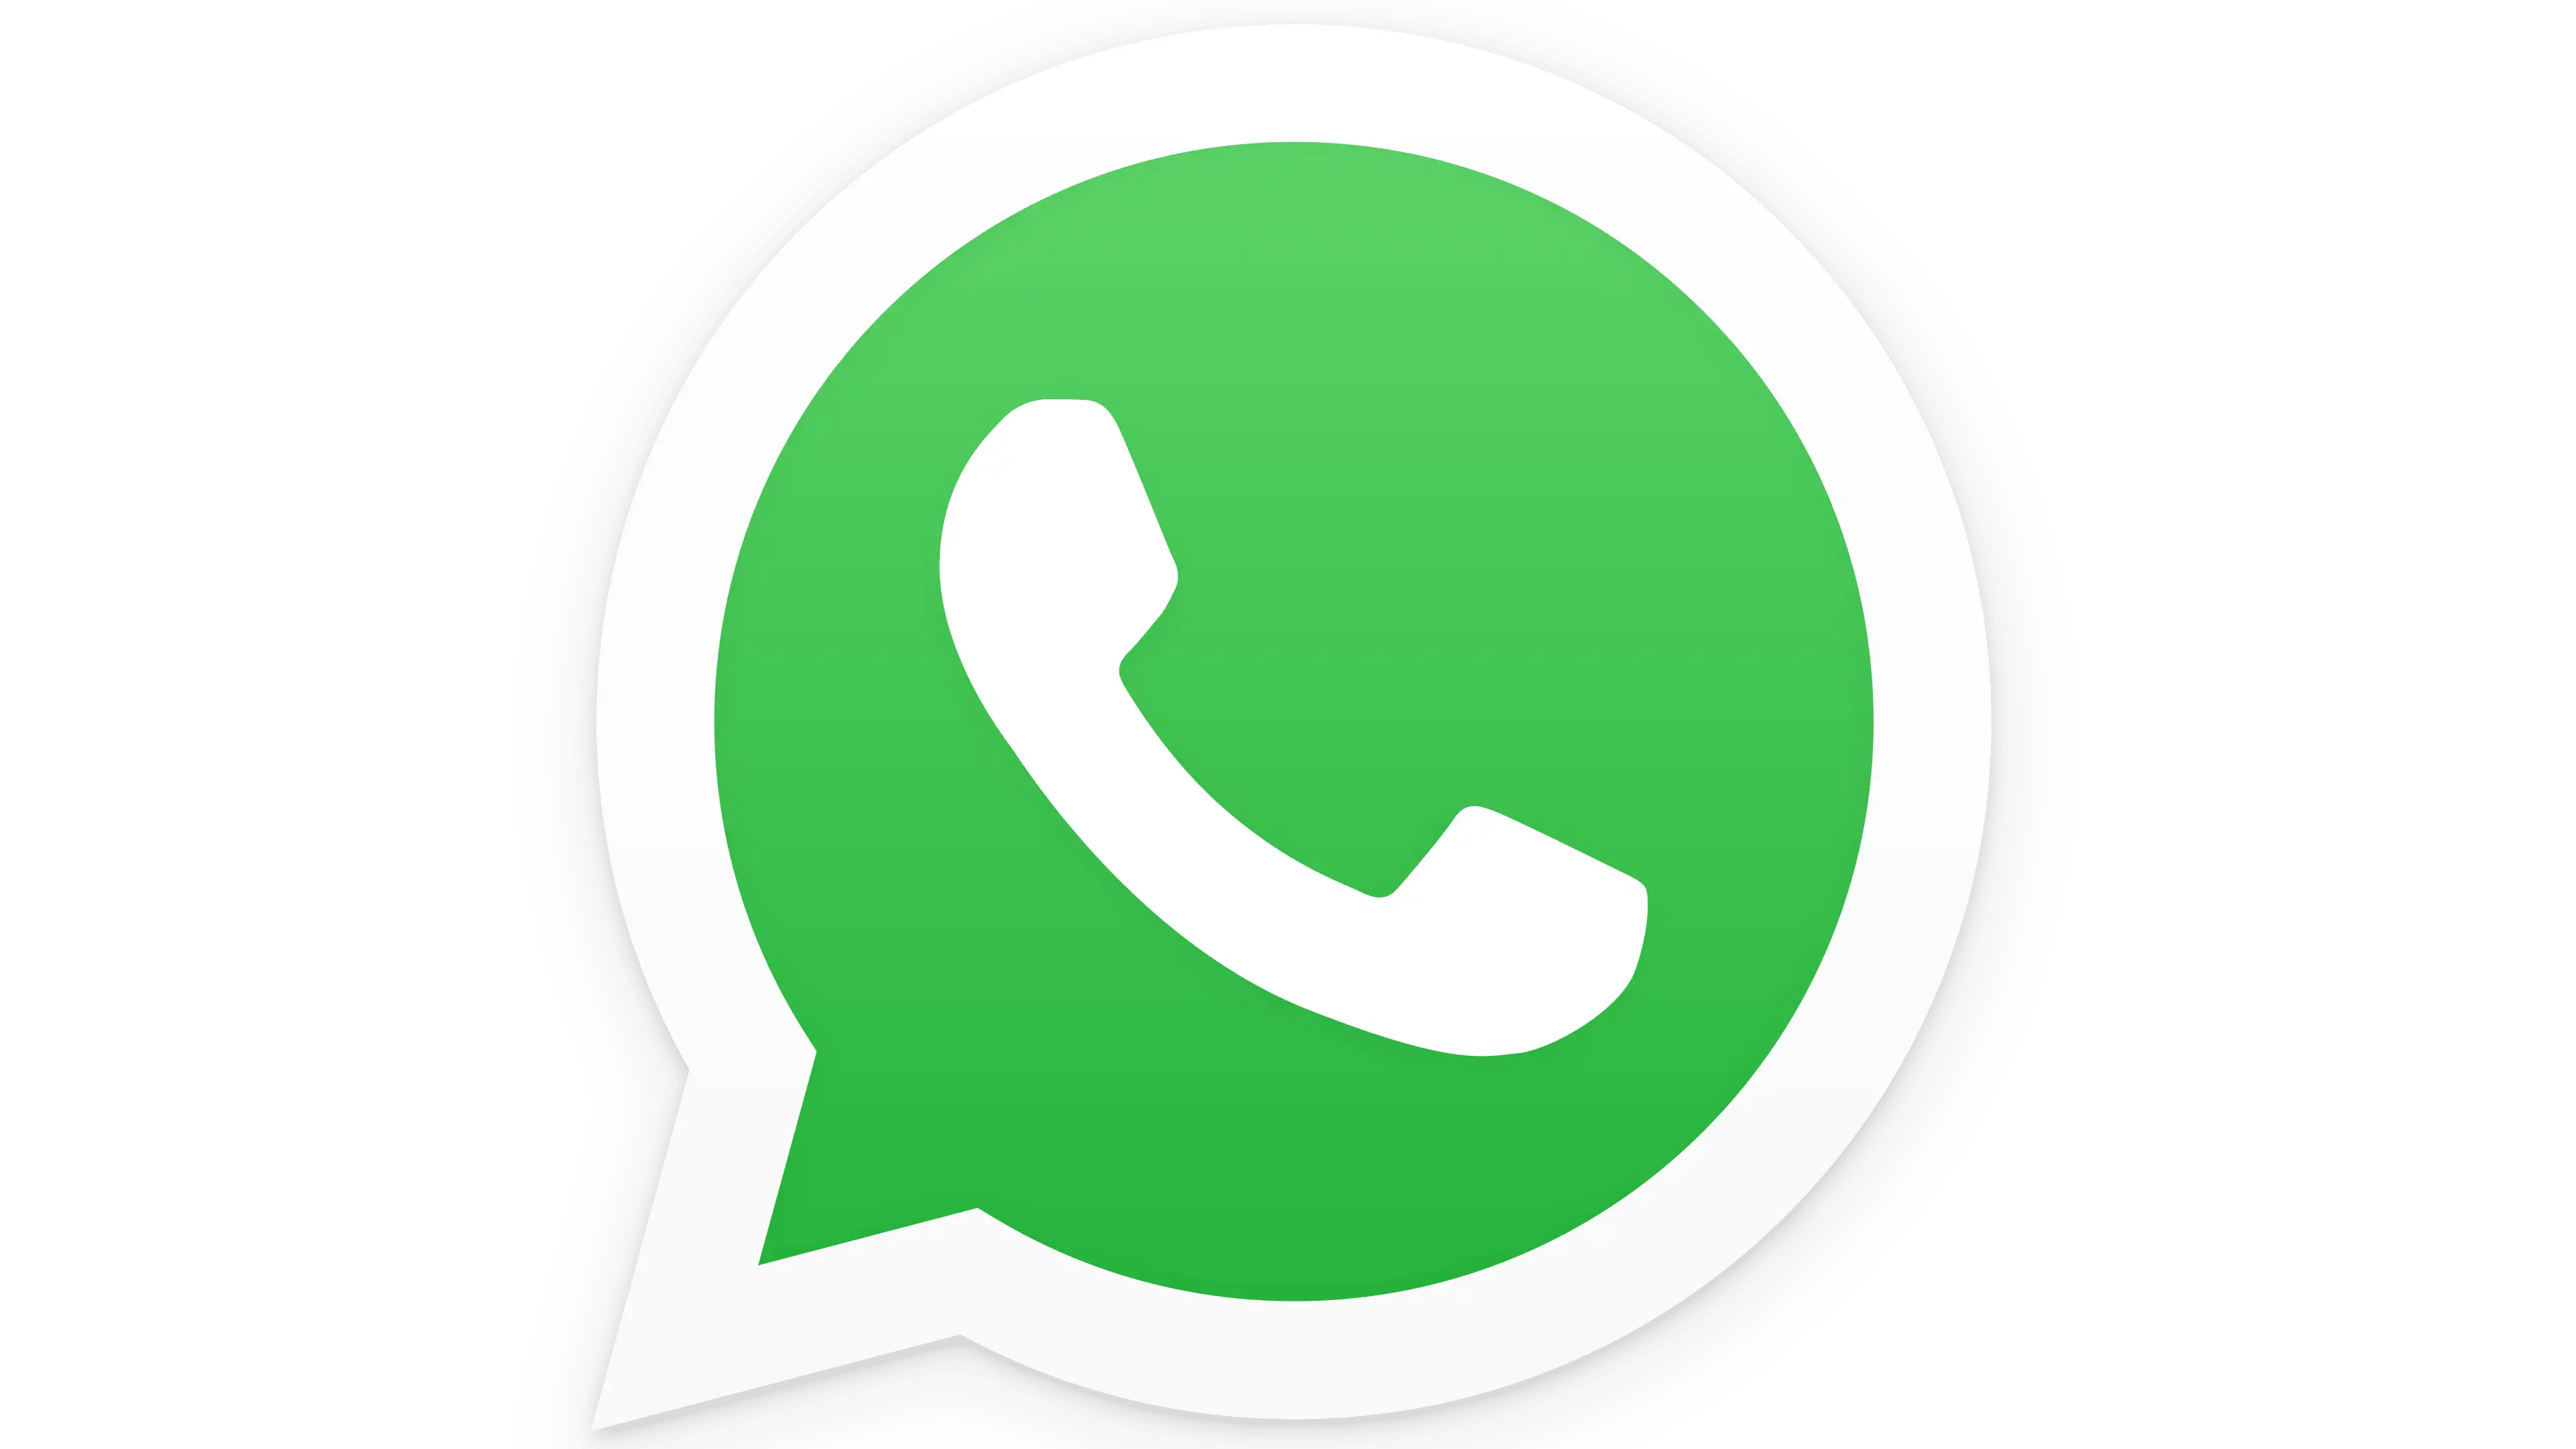 How to crosspost your WhatsApp Status to Facebook with these simple steps